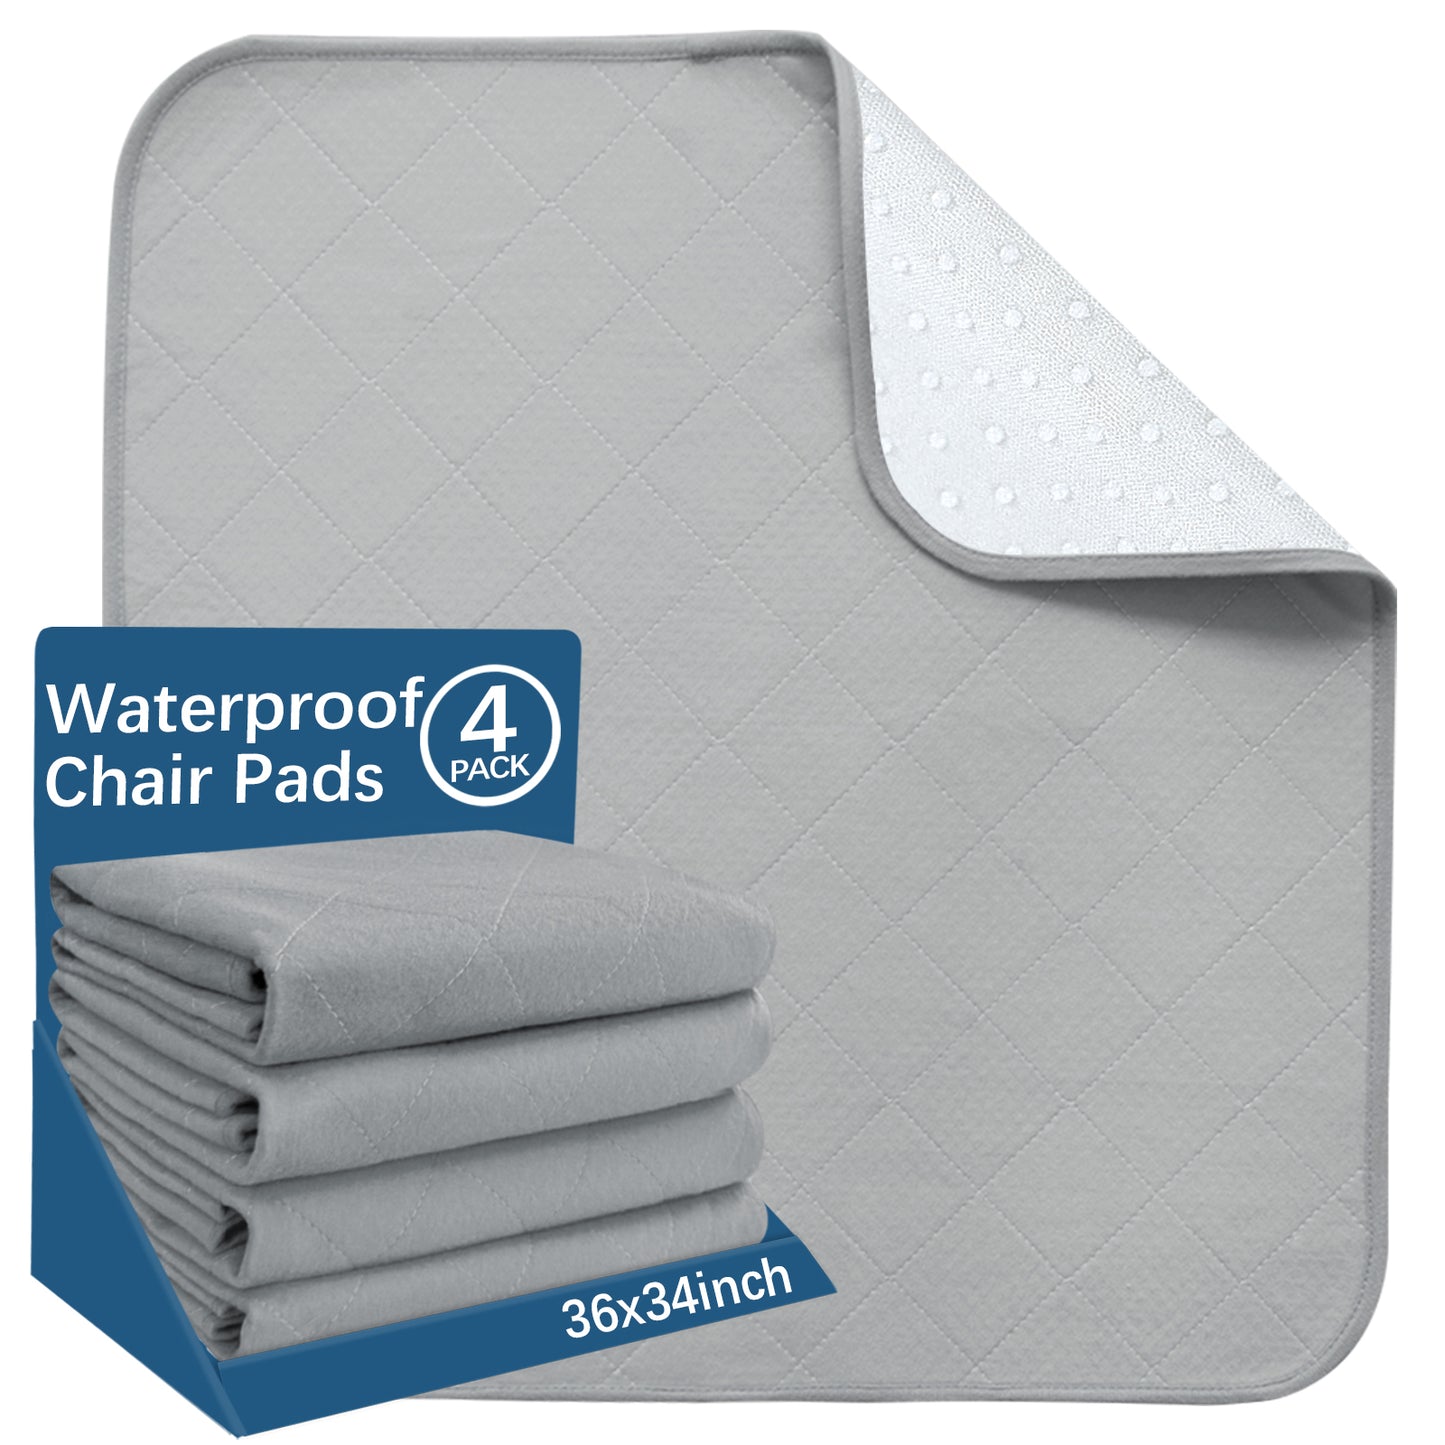 Waterproof Bed Pad/ Mat - Reusable Chuck Pads, Incontinence Underpads, Sheet Protector with Non-slip Back for Adults, Elderly, Kids and Pets, Machine Washable - Biloban Online Store